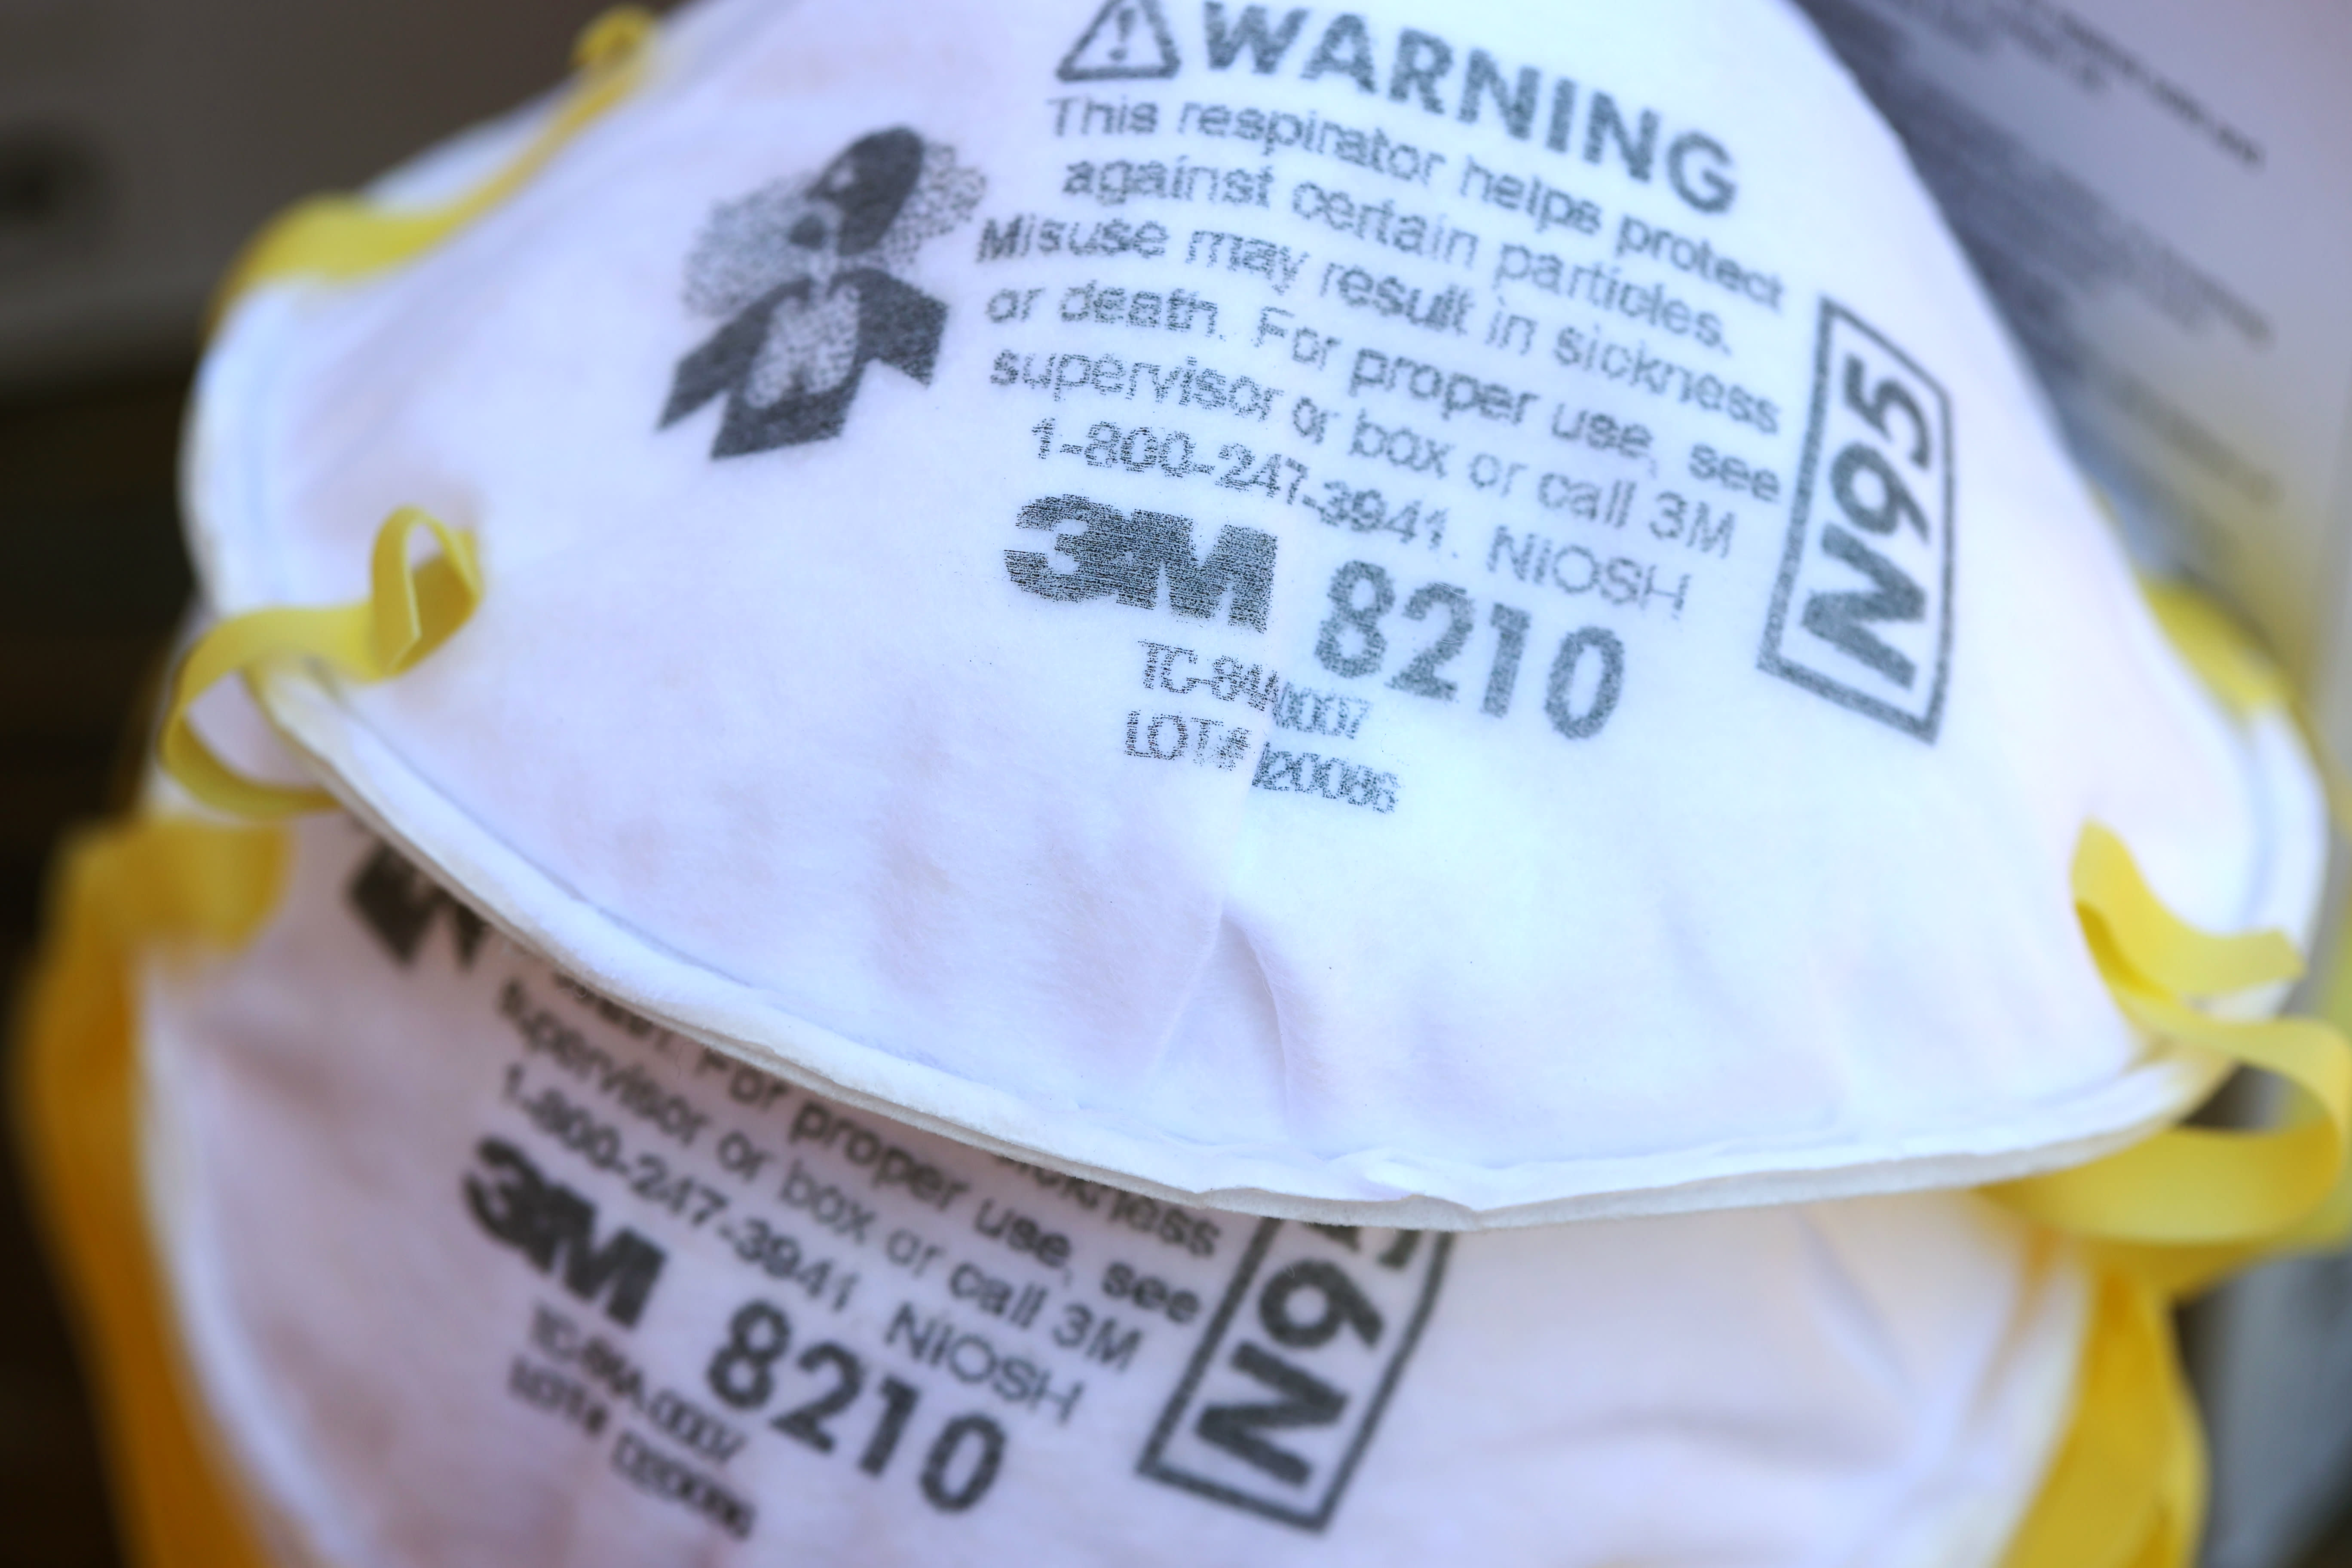 How to check if the N95 respirator is real: signs of fake masks